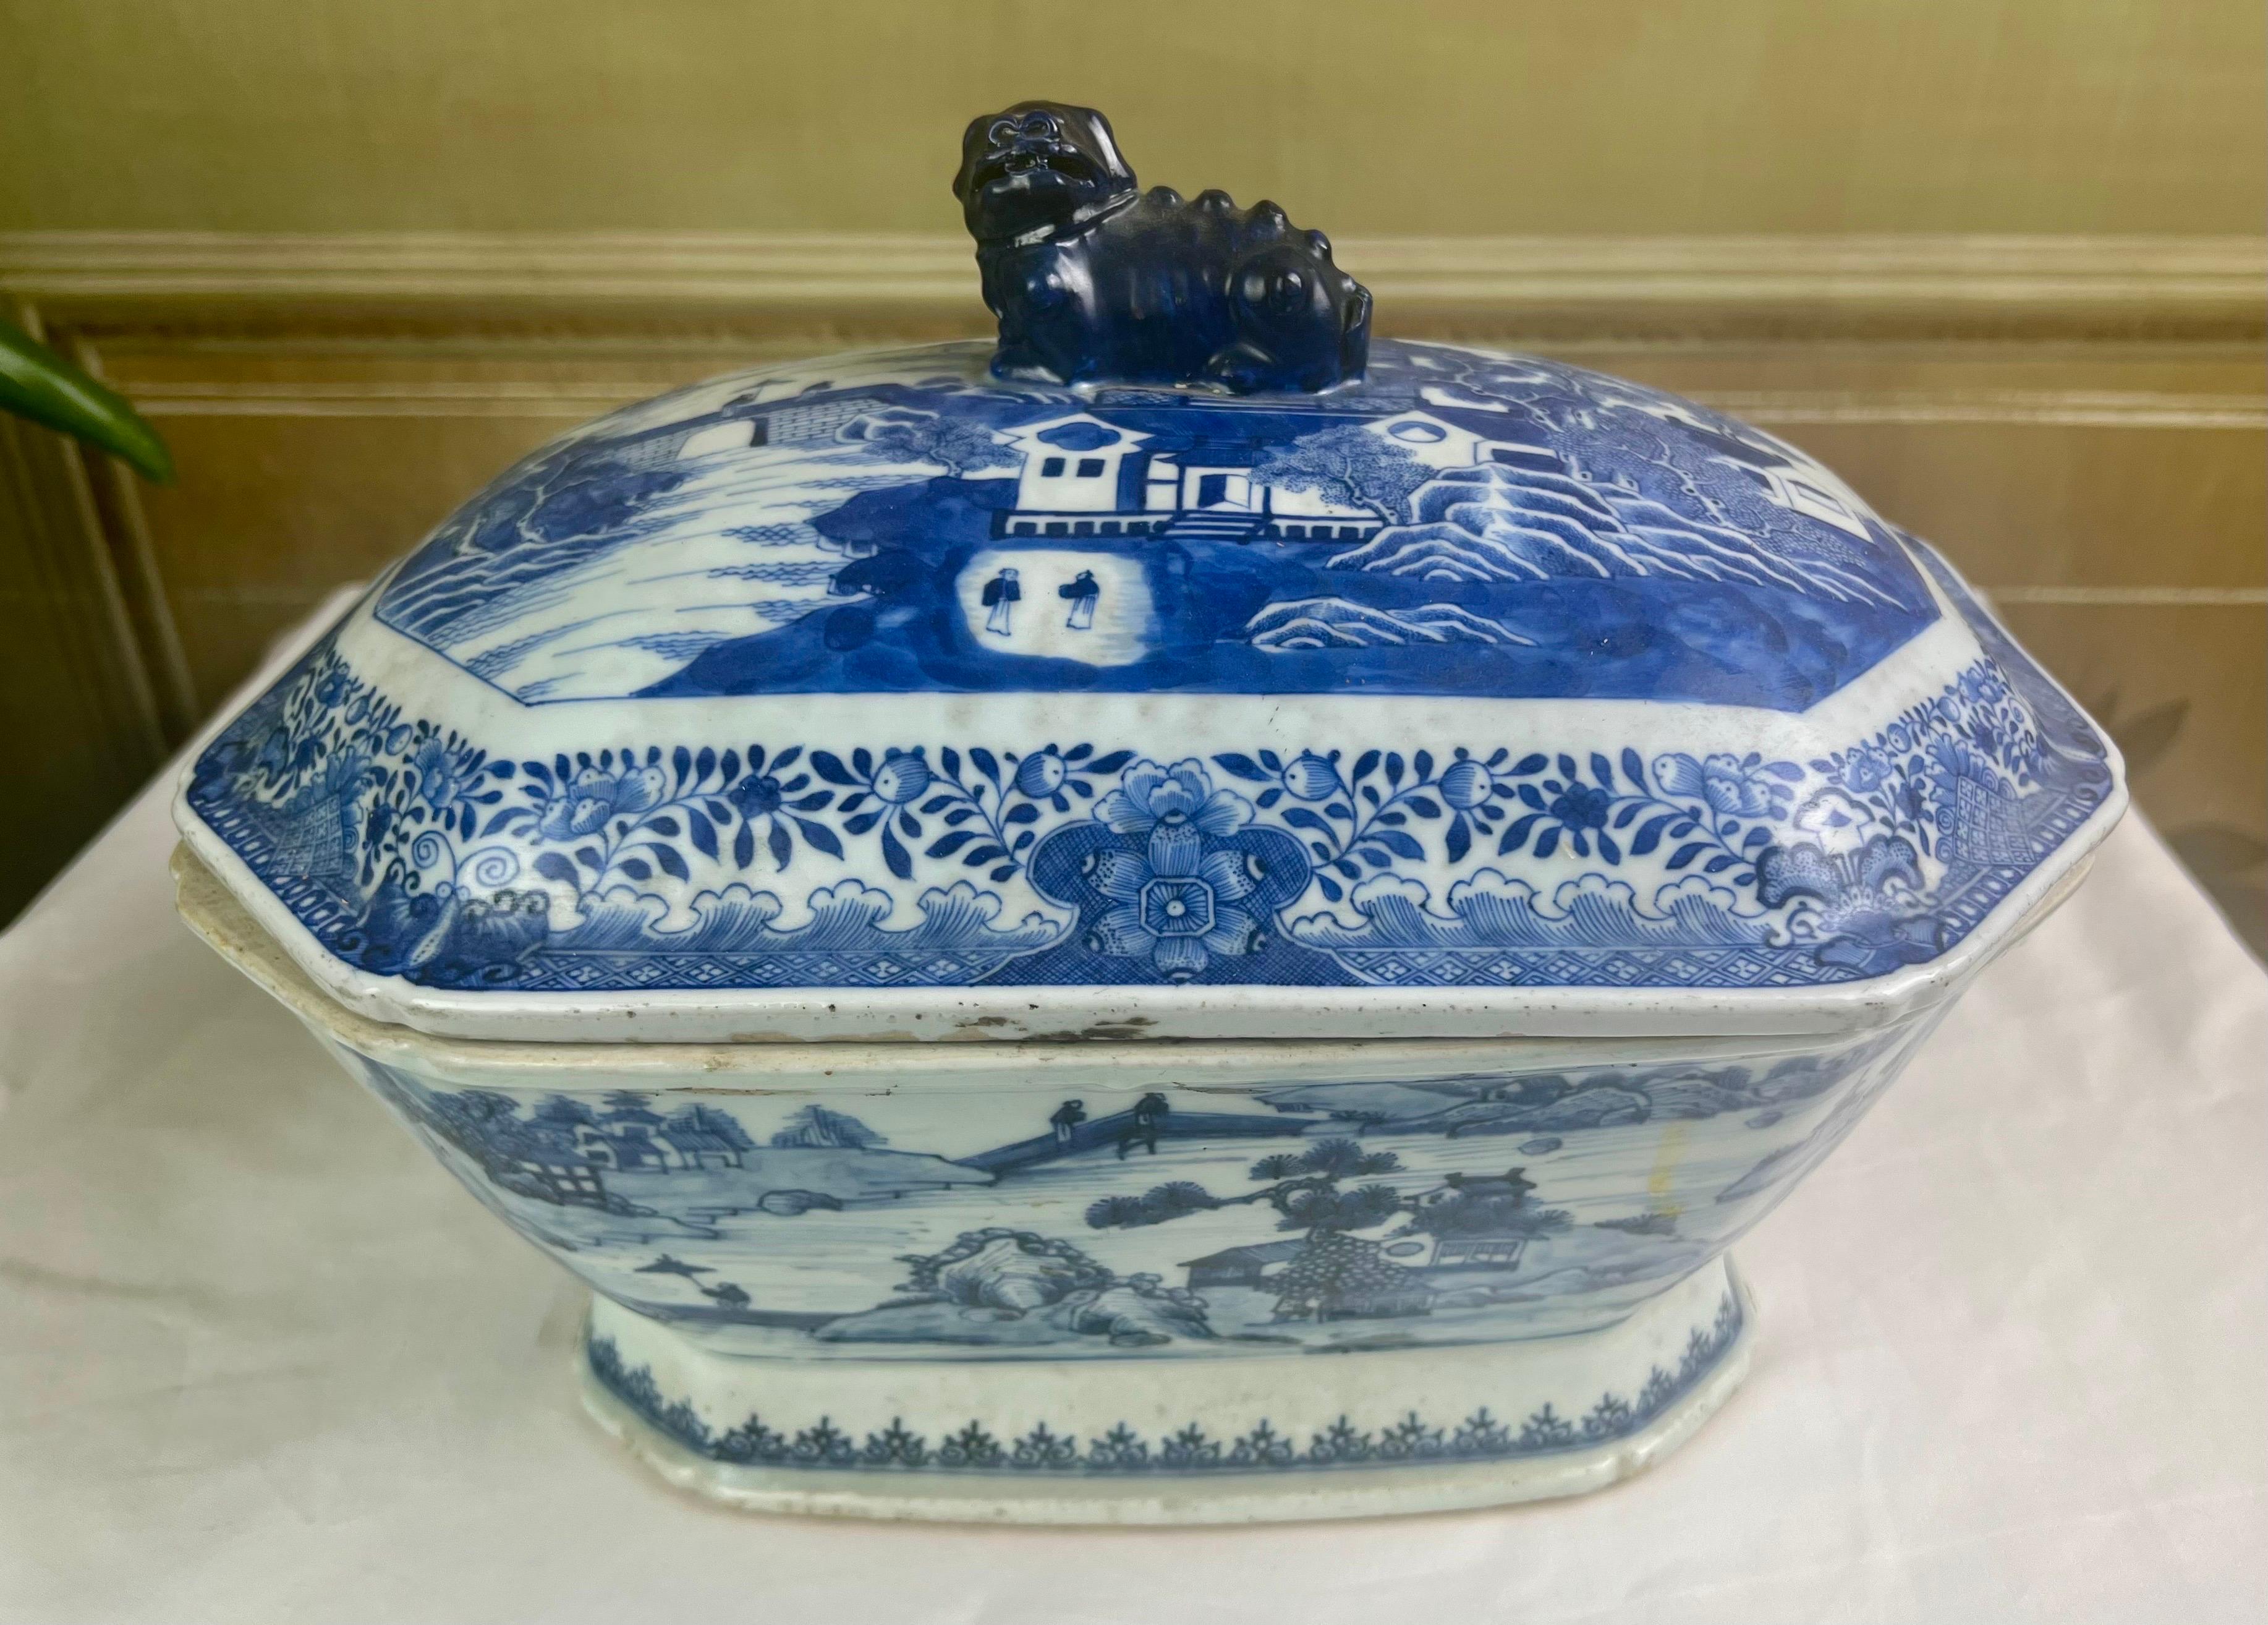 Gorgeous 18th C. under-glazed soup tureen with a dragon cover handle on the cover and wild boar handles on either side of the base piece. The piece is covered with a hand painted village scene including people, boats, willows etc. The tureen is